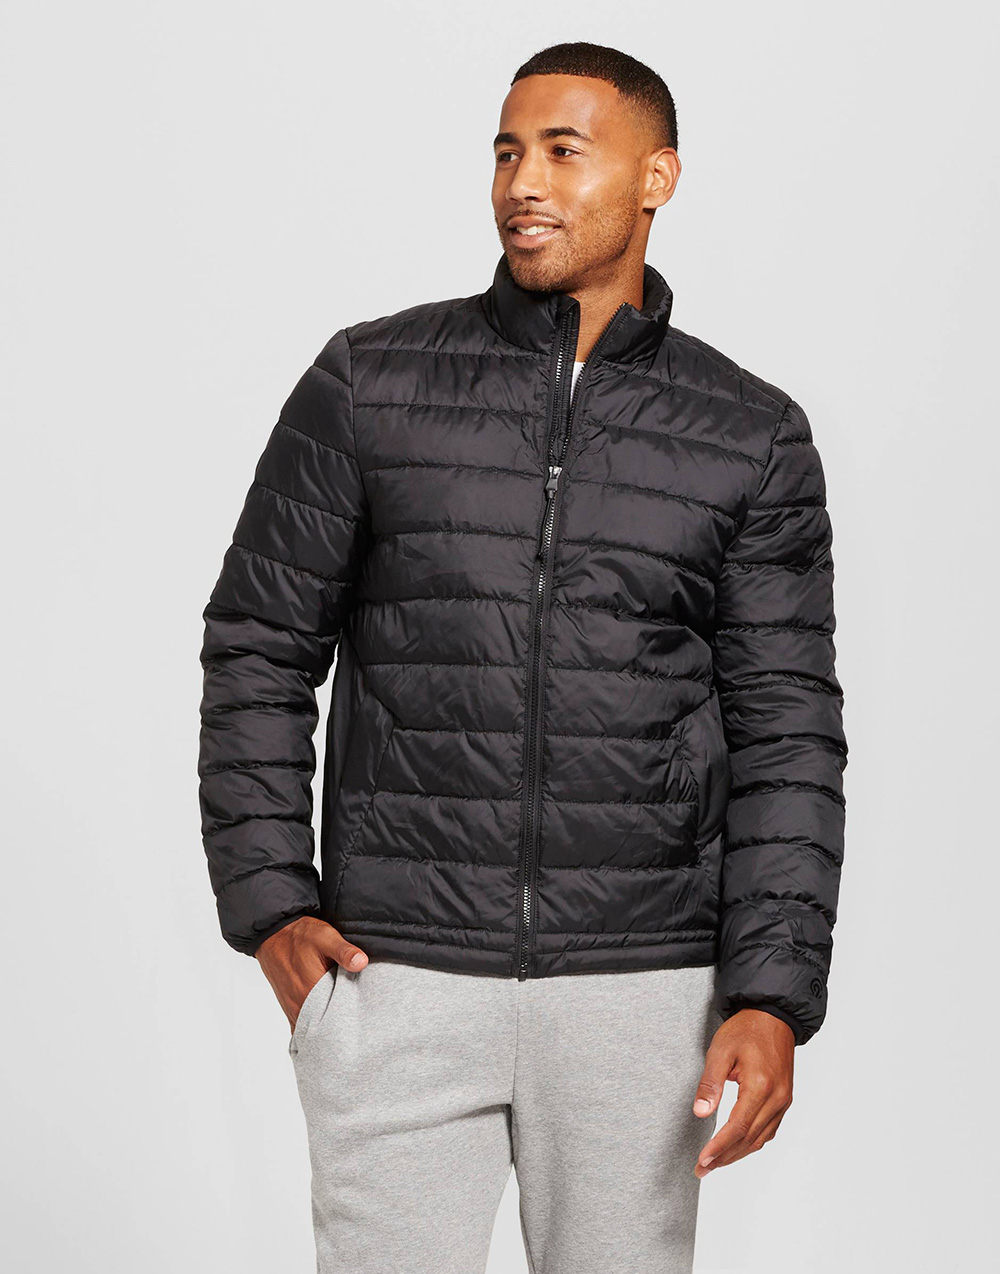 Lightweight Puffer Jacket – Product Slider for WooCommerce